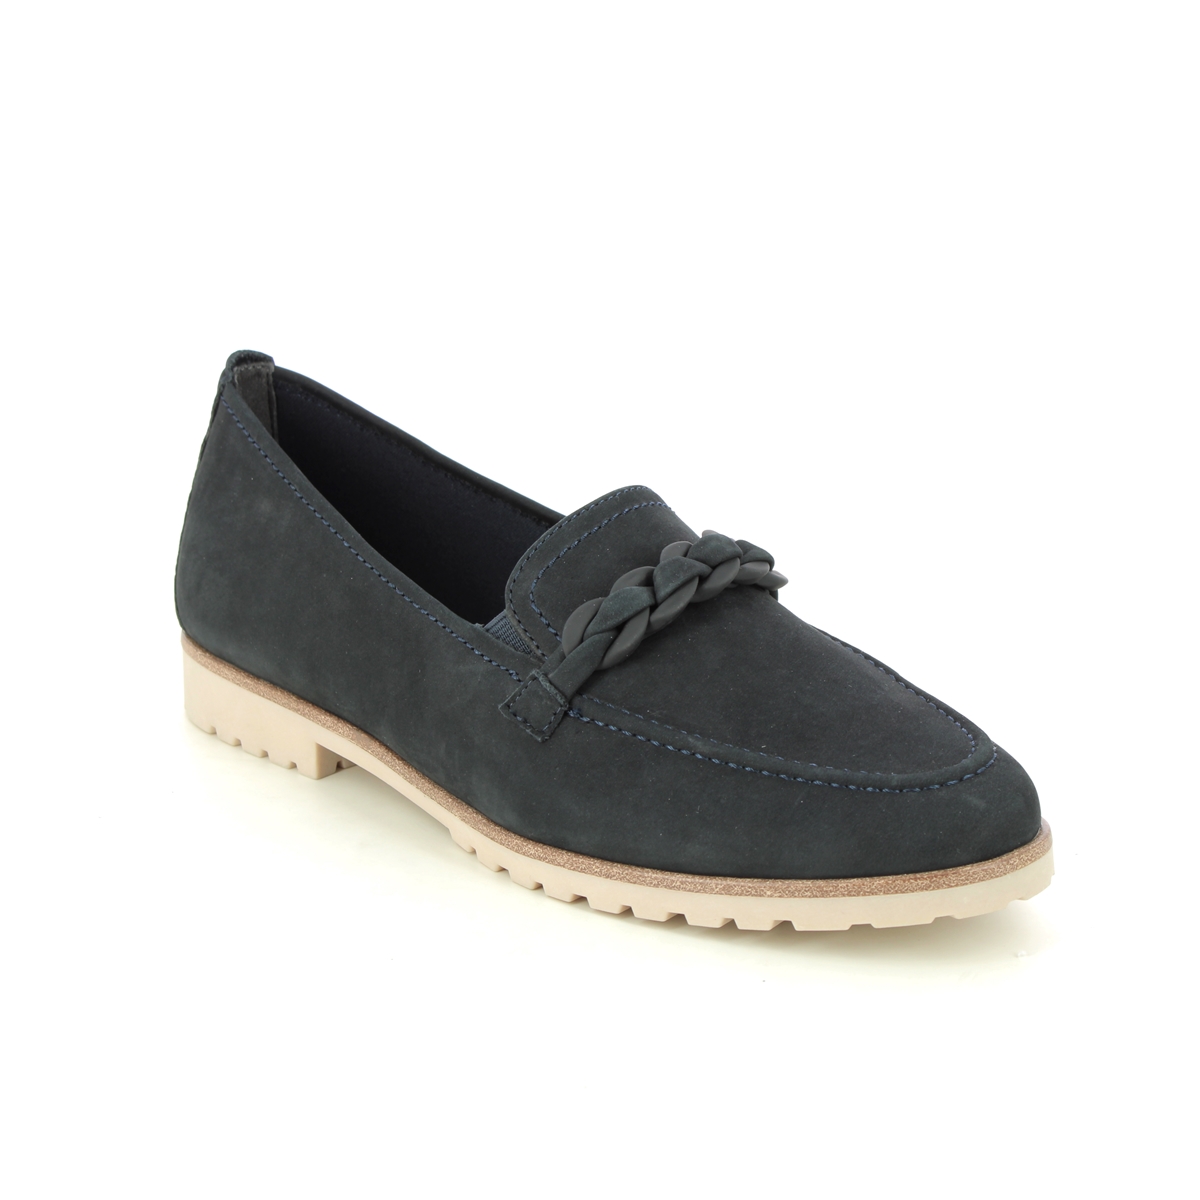 Tamaris Careen Loafer Navy Nubuck Womens Loafers 24200-20-805 In Size 40 In Plain Navy Nubuck